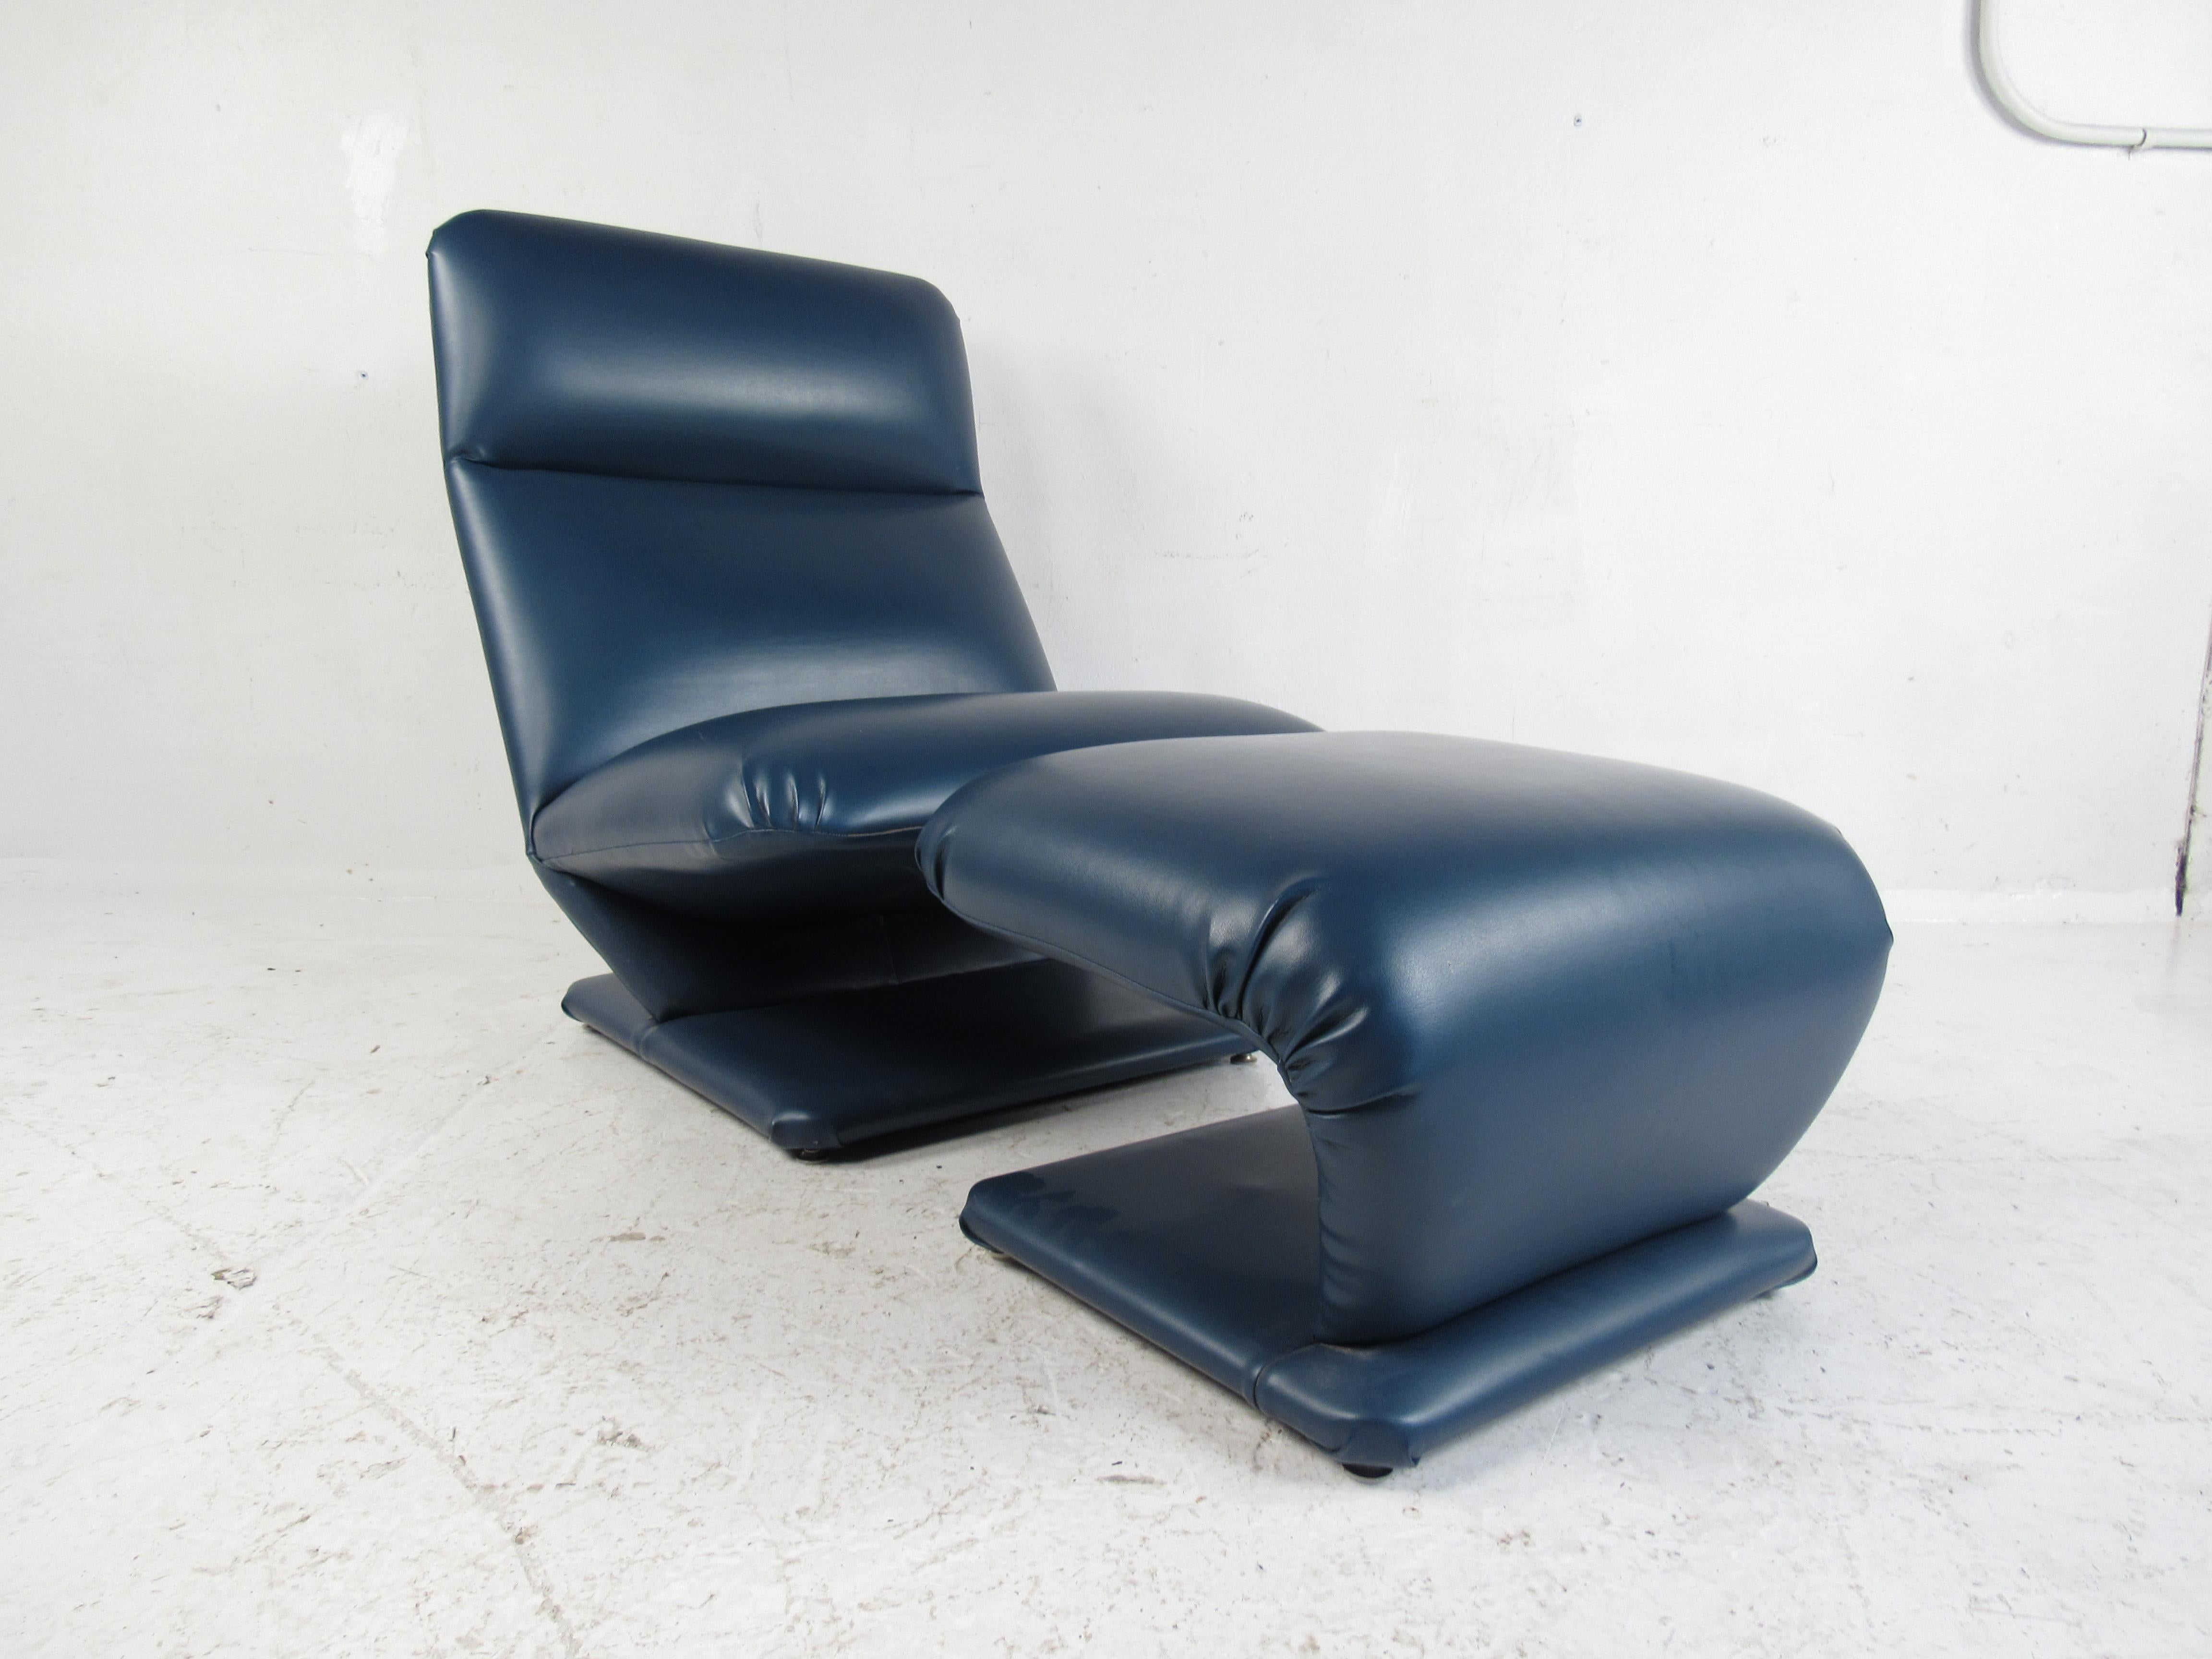 This exquisite pair of Mid-Century Modern lounge chairs boast an unusual cantilever 